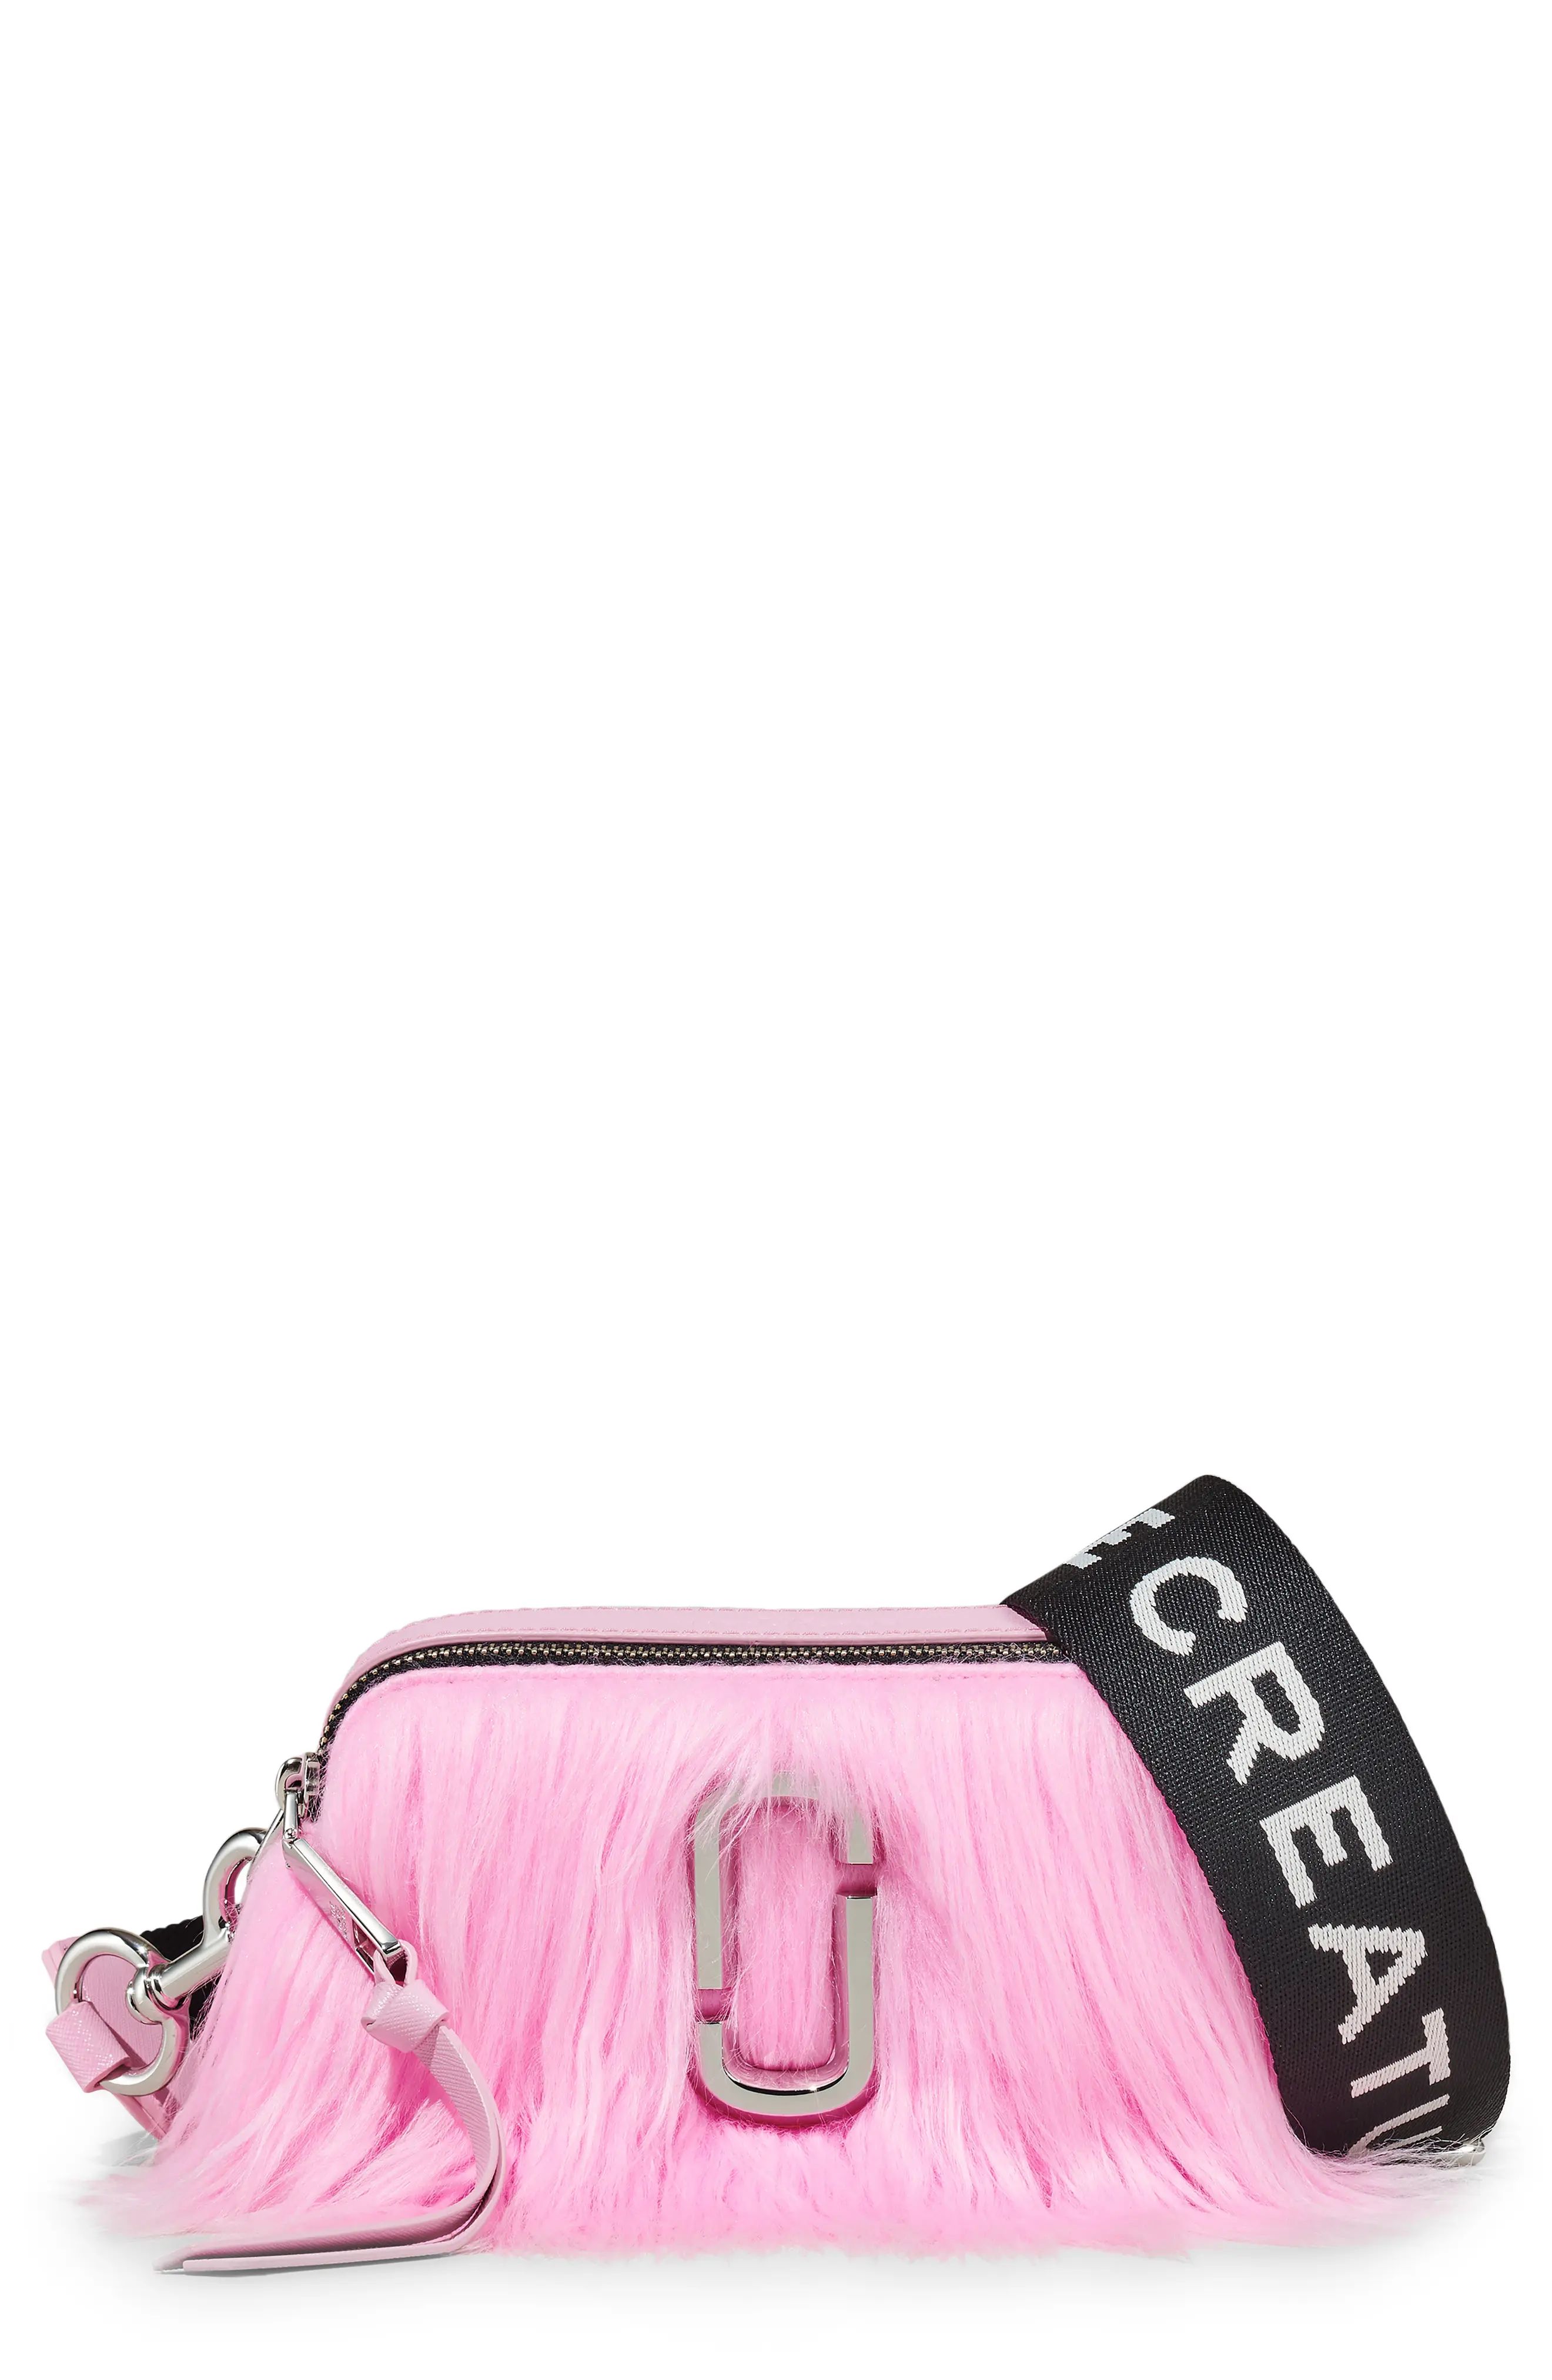 Marc Jacobs Snapshot Faux Fur Crossbody Bag in Confection Pink at Nordstrom | Nordstrom